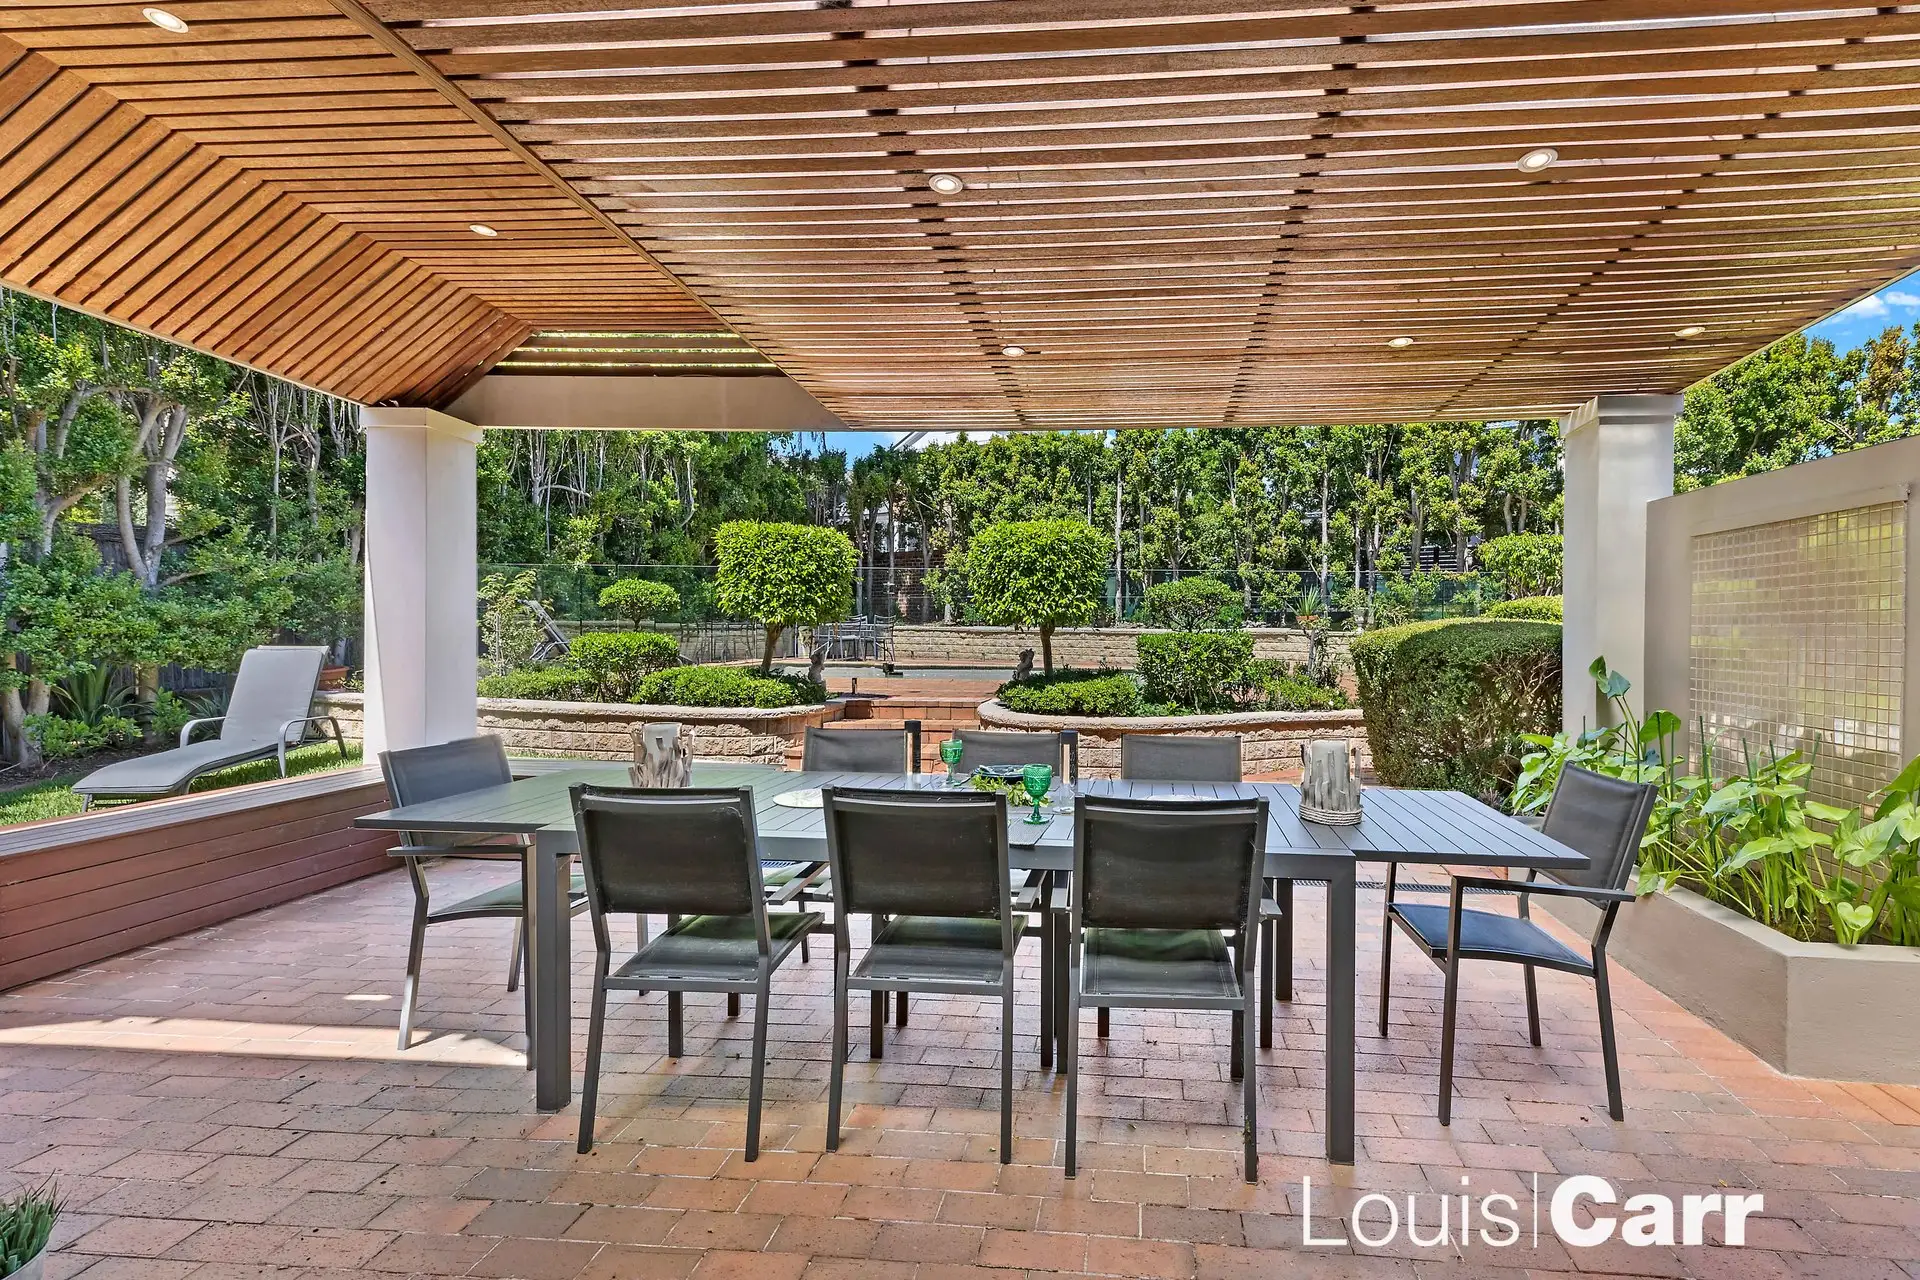 Photo #2: 31 Ulundri Drive, Castle Hill - Sold by Louis Carr Real Estate